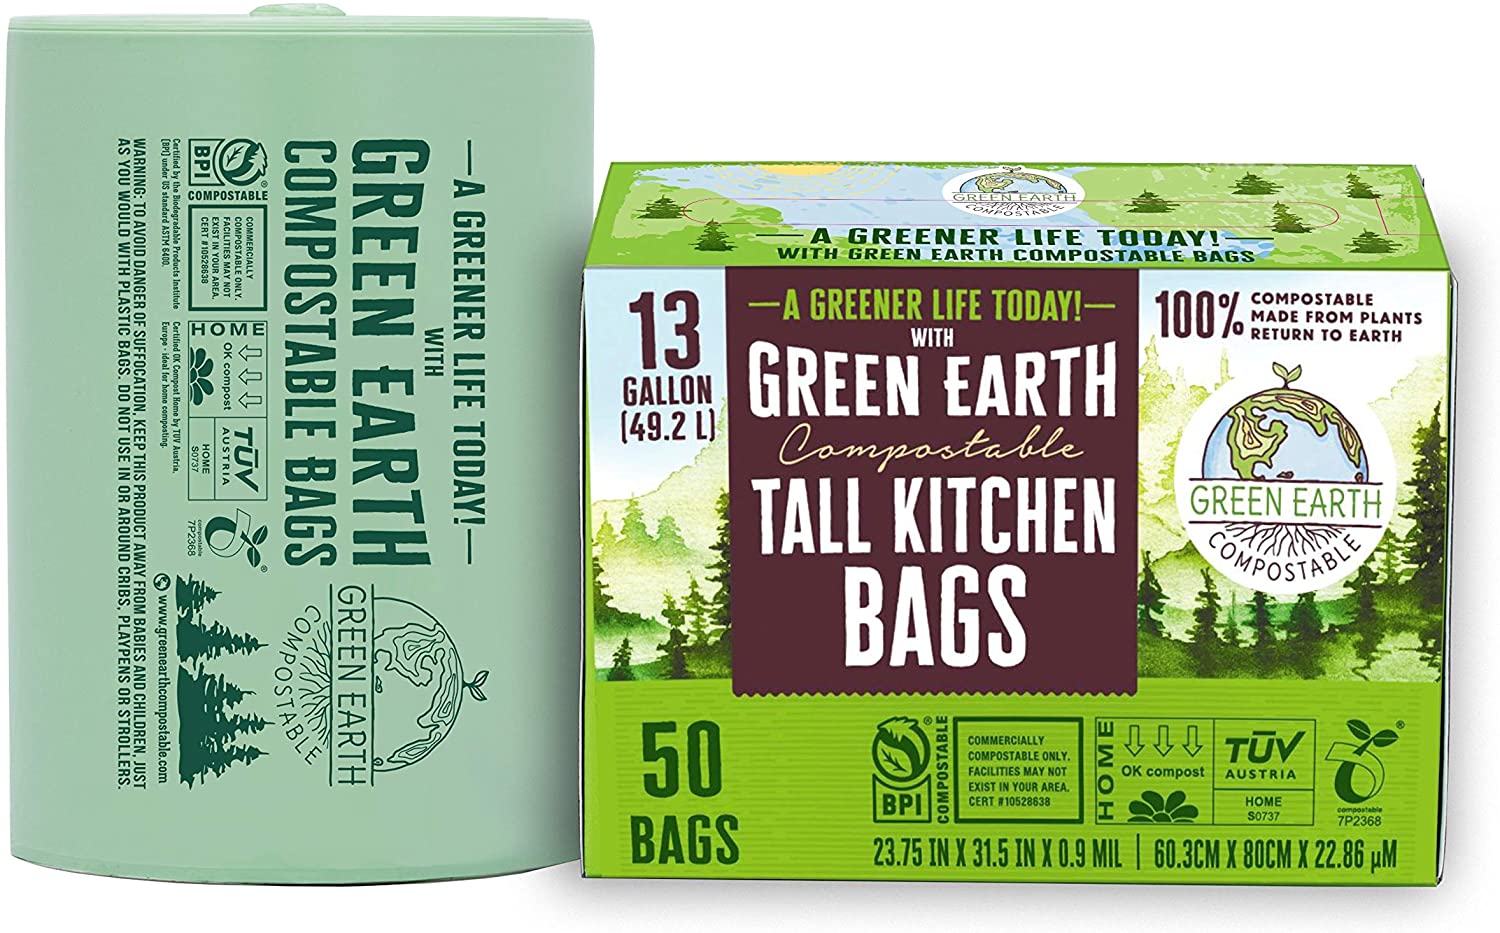 https://www.dontwasteyourmoney.com/wp-content/uploads/2020/10/green-earth-compostable-biodegradable-tall-kitchen-trash-bags.jpg